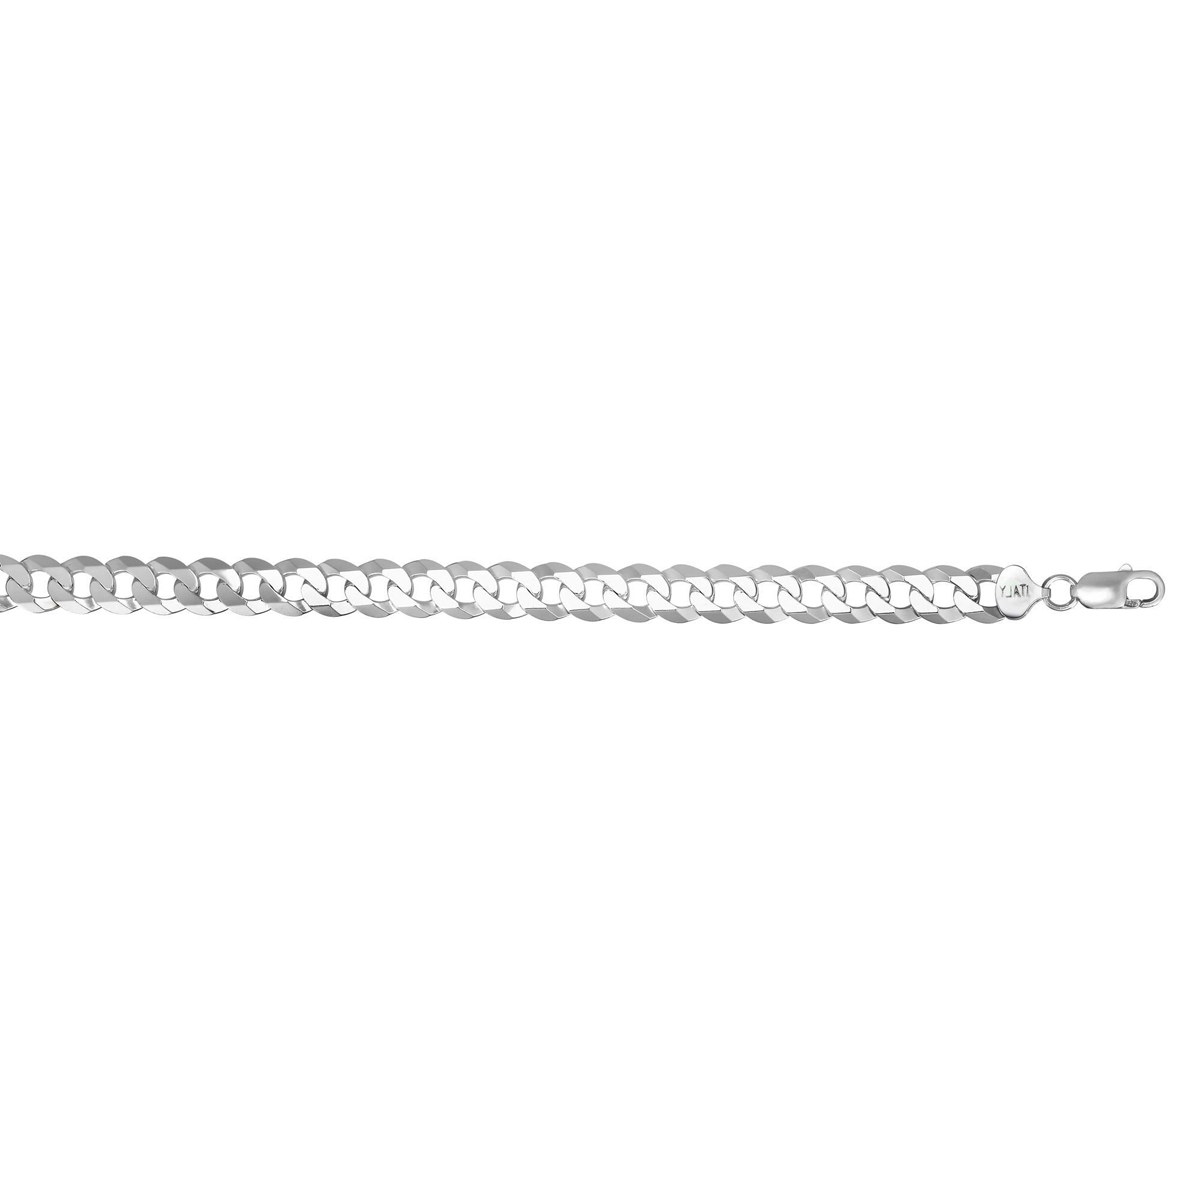 Sterling Silver 10.2mm Diamond Cut Concave Curb Chain Rhodium Finish Bracelet Measuring 8.5" With Lobster Clasp.